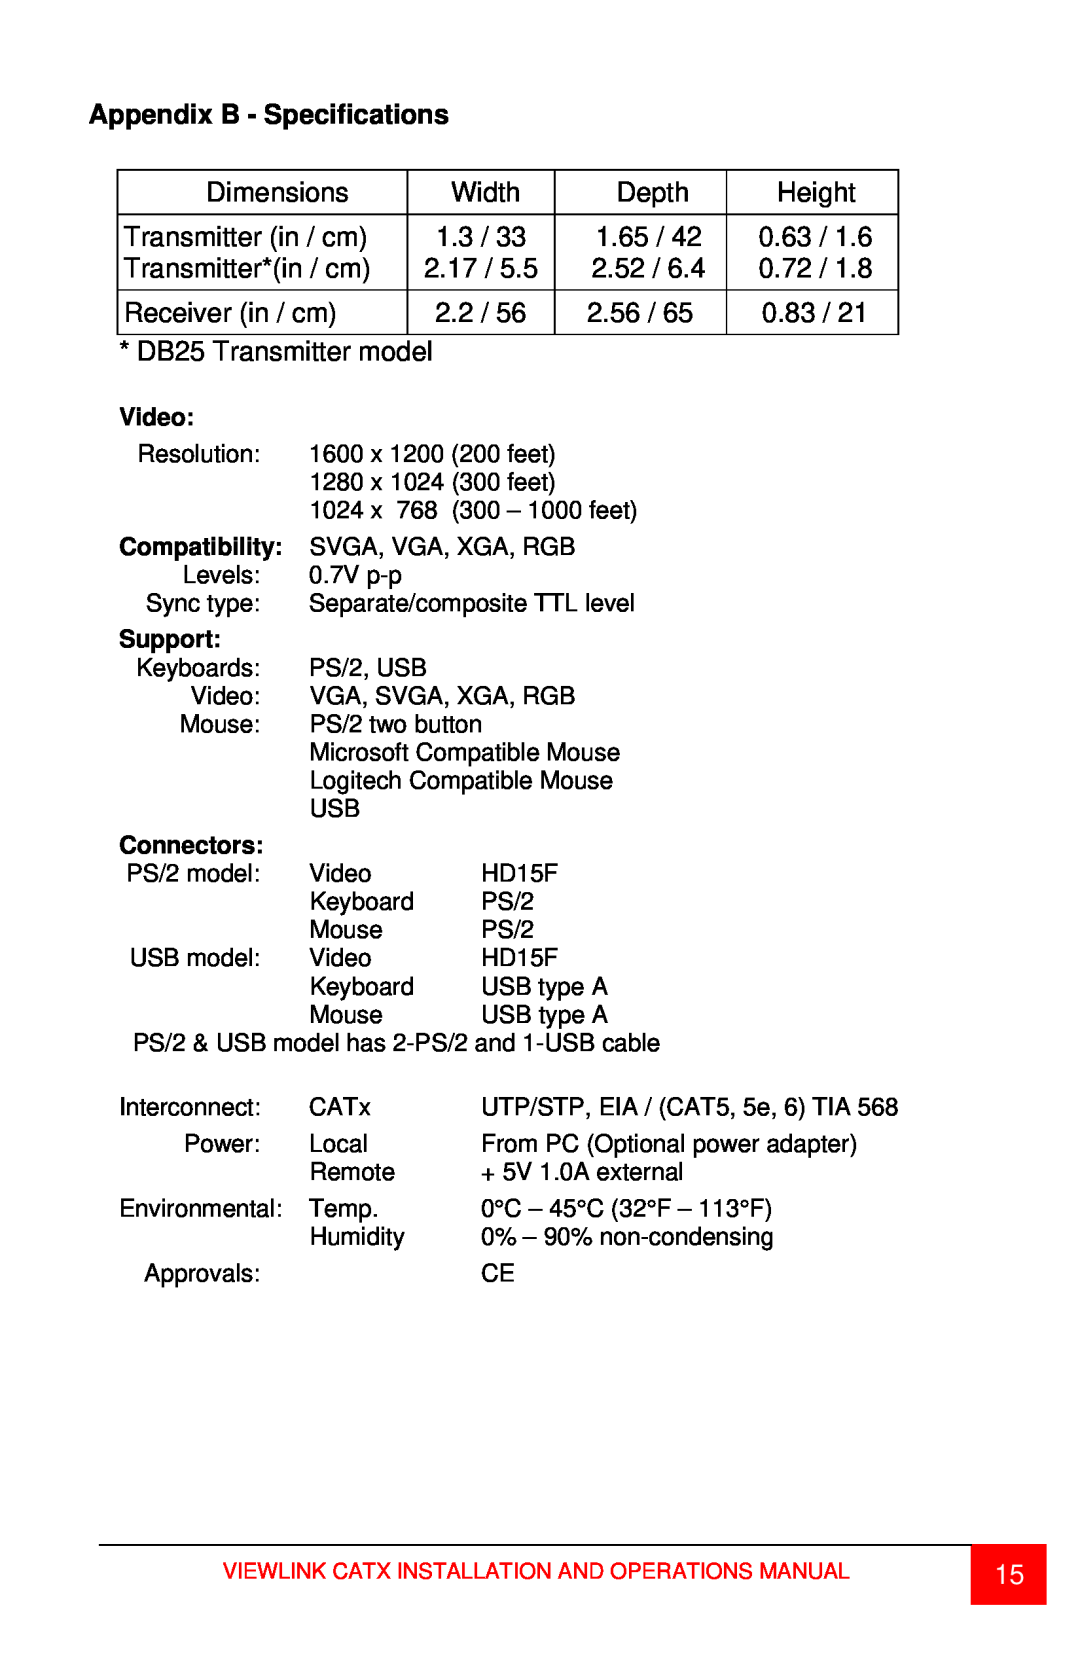 Rose electronic CATx manual Appendix B - Specifications 